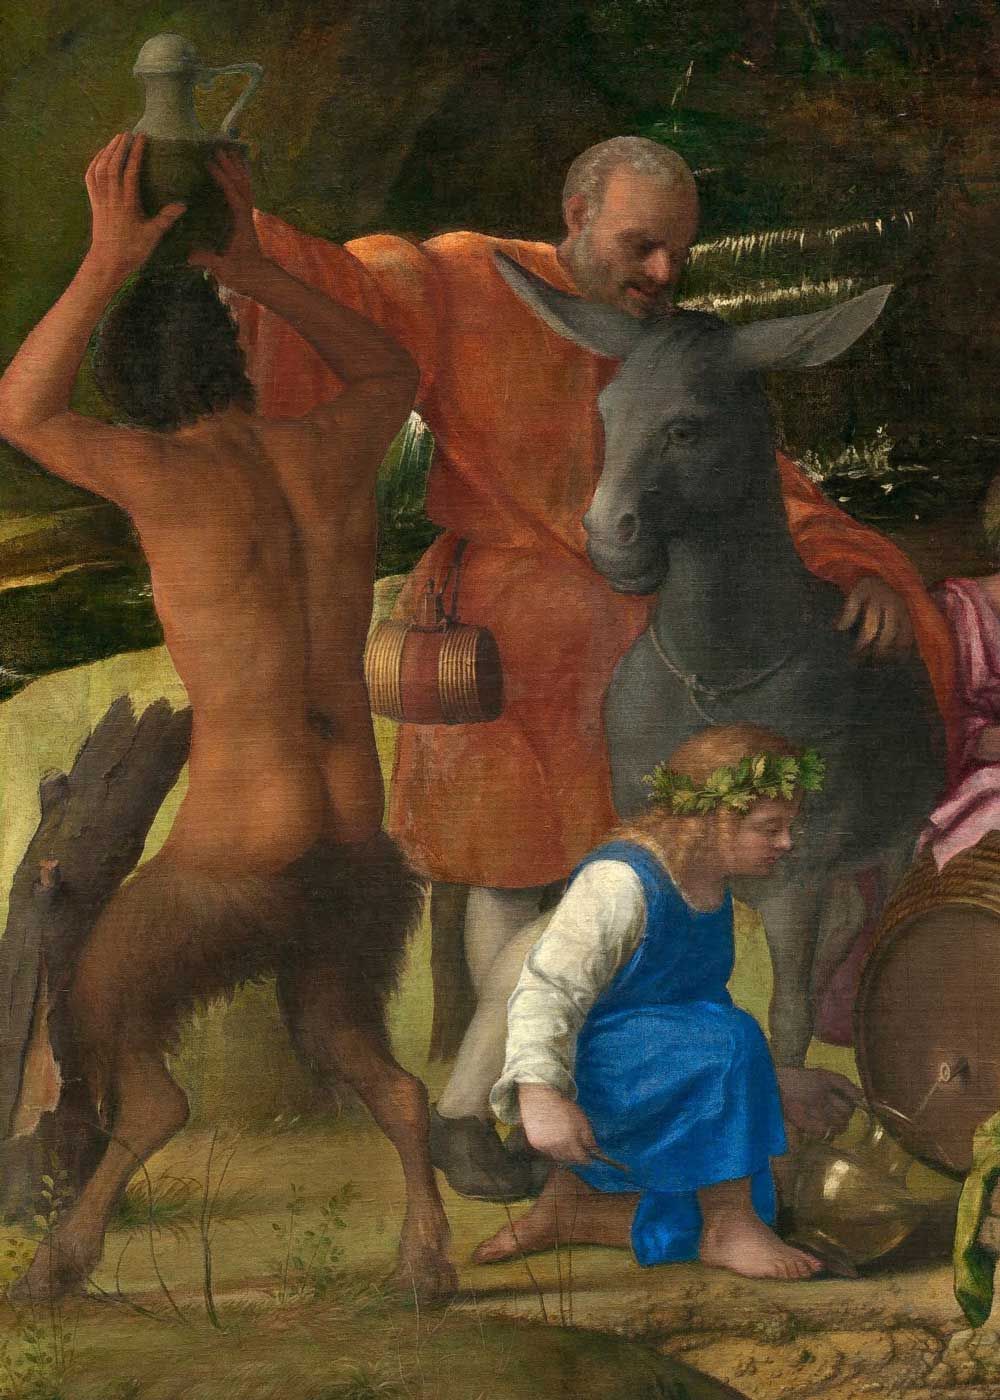 Giovanni Bellini and Titian, The Feast of the Gods, detail of Silenus